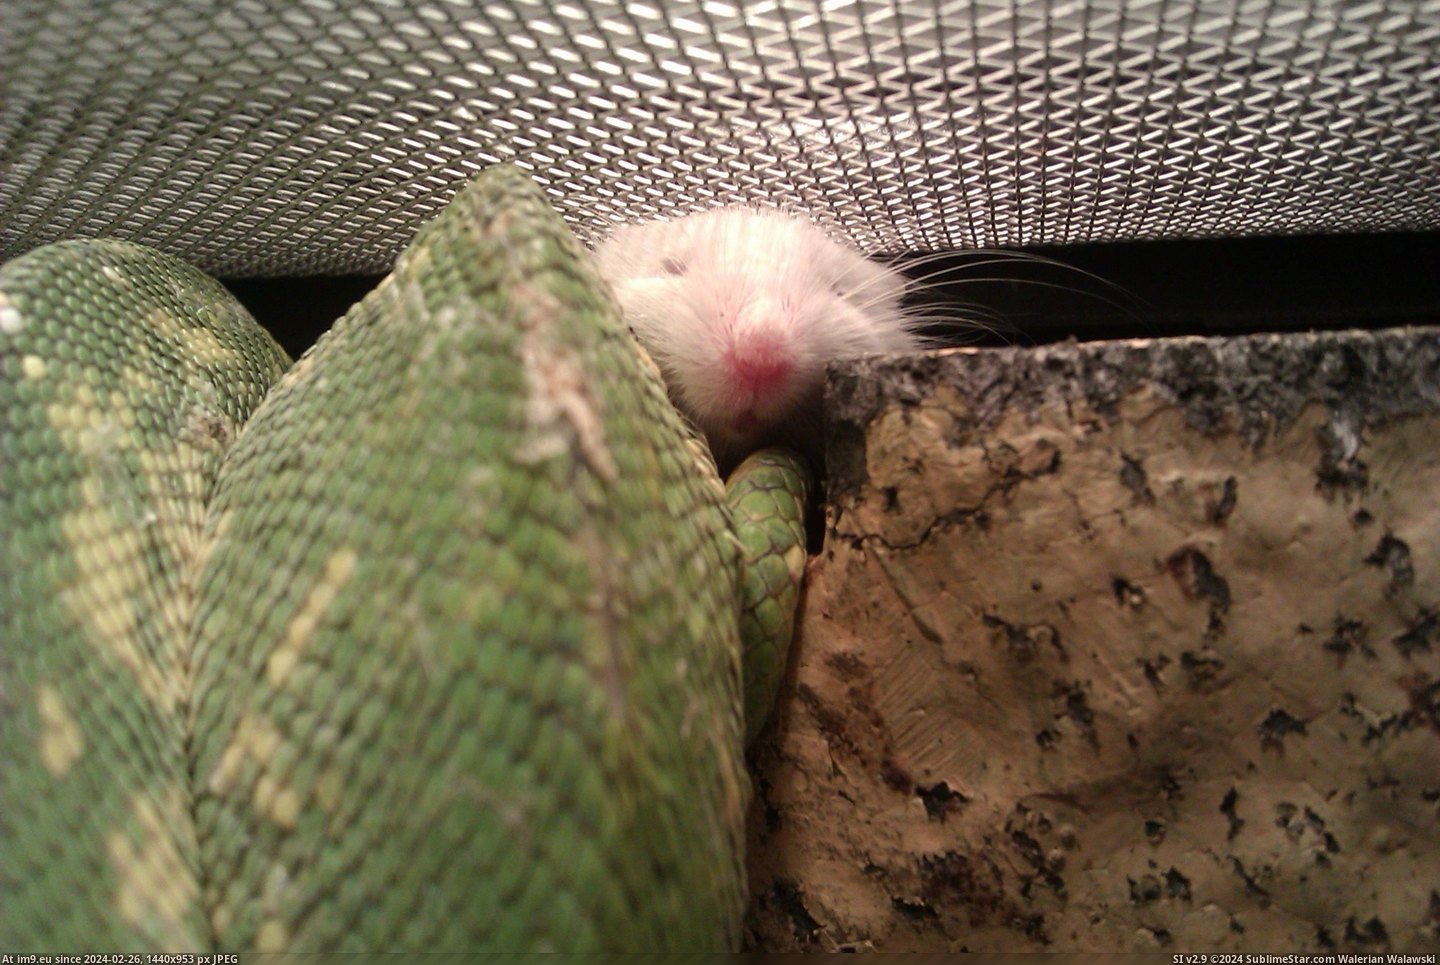 #Night #Eat #Heat #Lamp #Lived #Refuses #Togeth #Mouse #Snake #Cuddle [Aww] This snake and mouse cuddle under the heat lamp every night. He refuses to eat this particular mouse. They've lived togeth Pic. (Изображение из альбом My r/AWW favs))